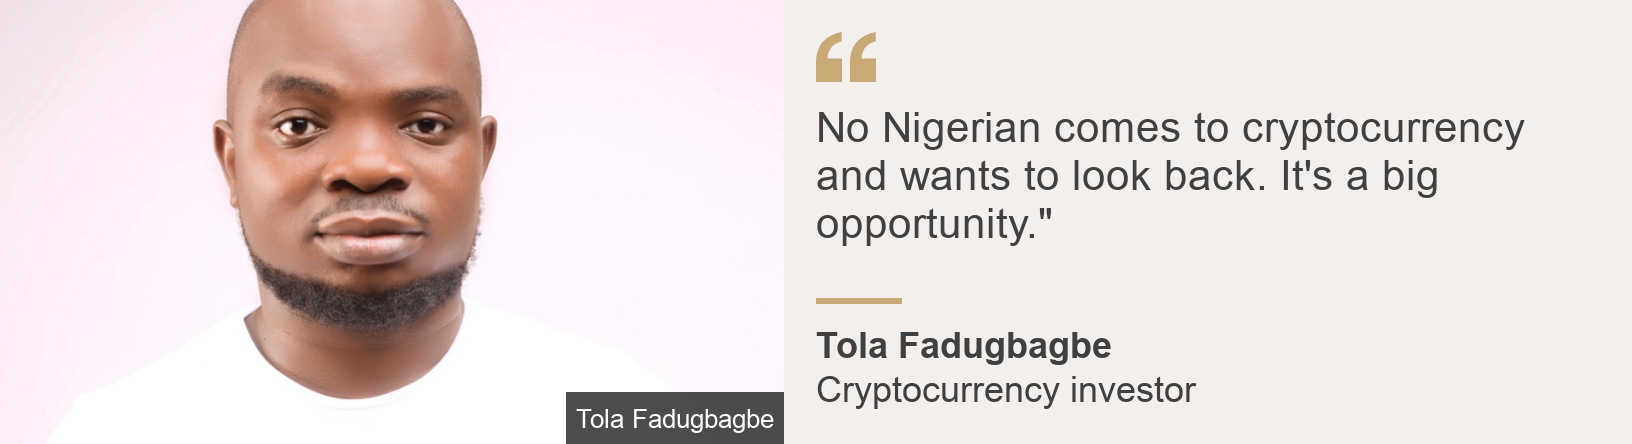 Cryptocurrencies: Why Nigeria is a global leader in Bitcoin trade - BBC News